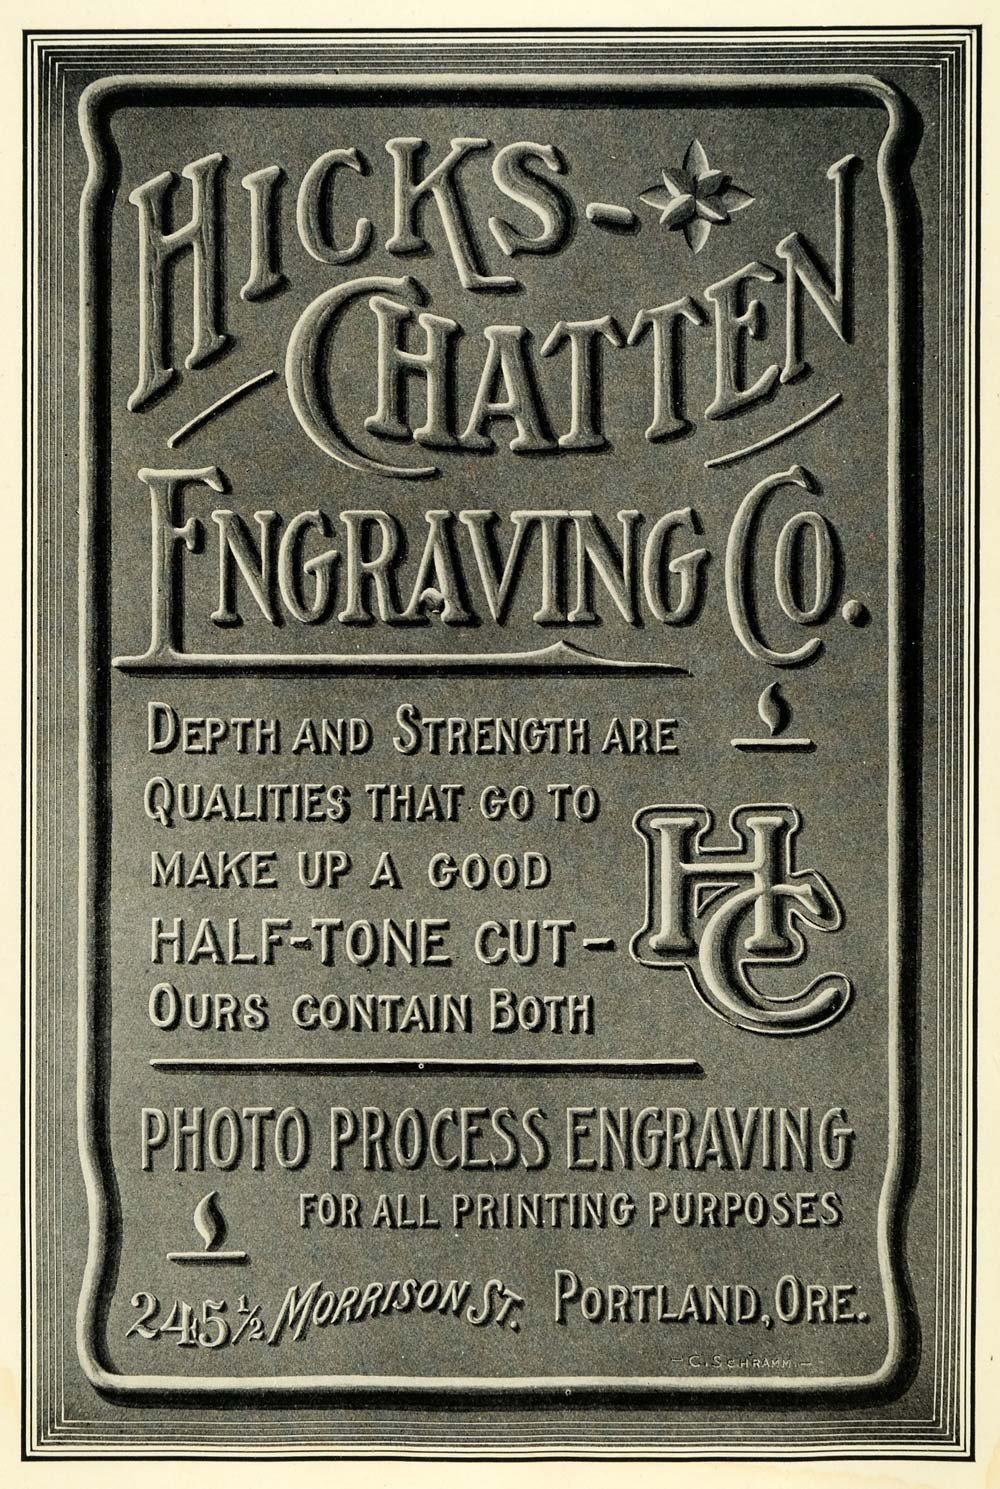 Hicks Chatten Engraving Co. ad 1904